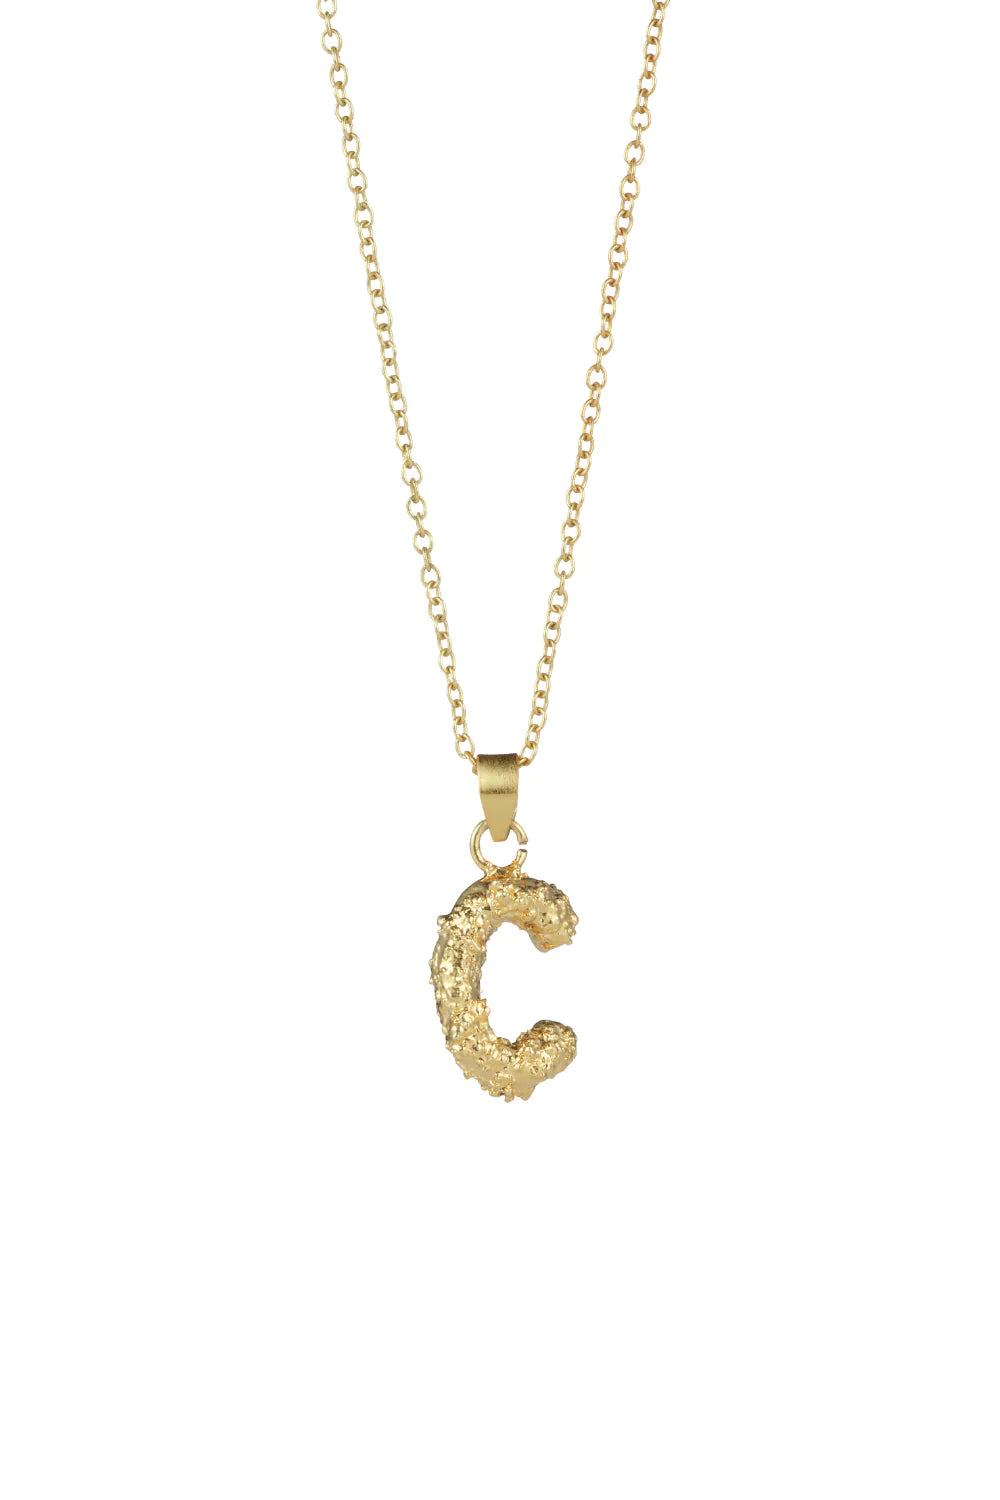 Balyck Ornate Initial Gold Necklace Small